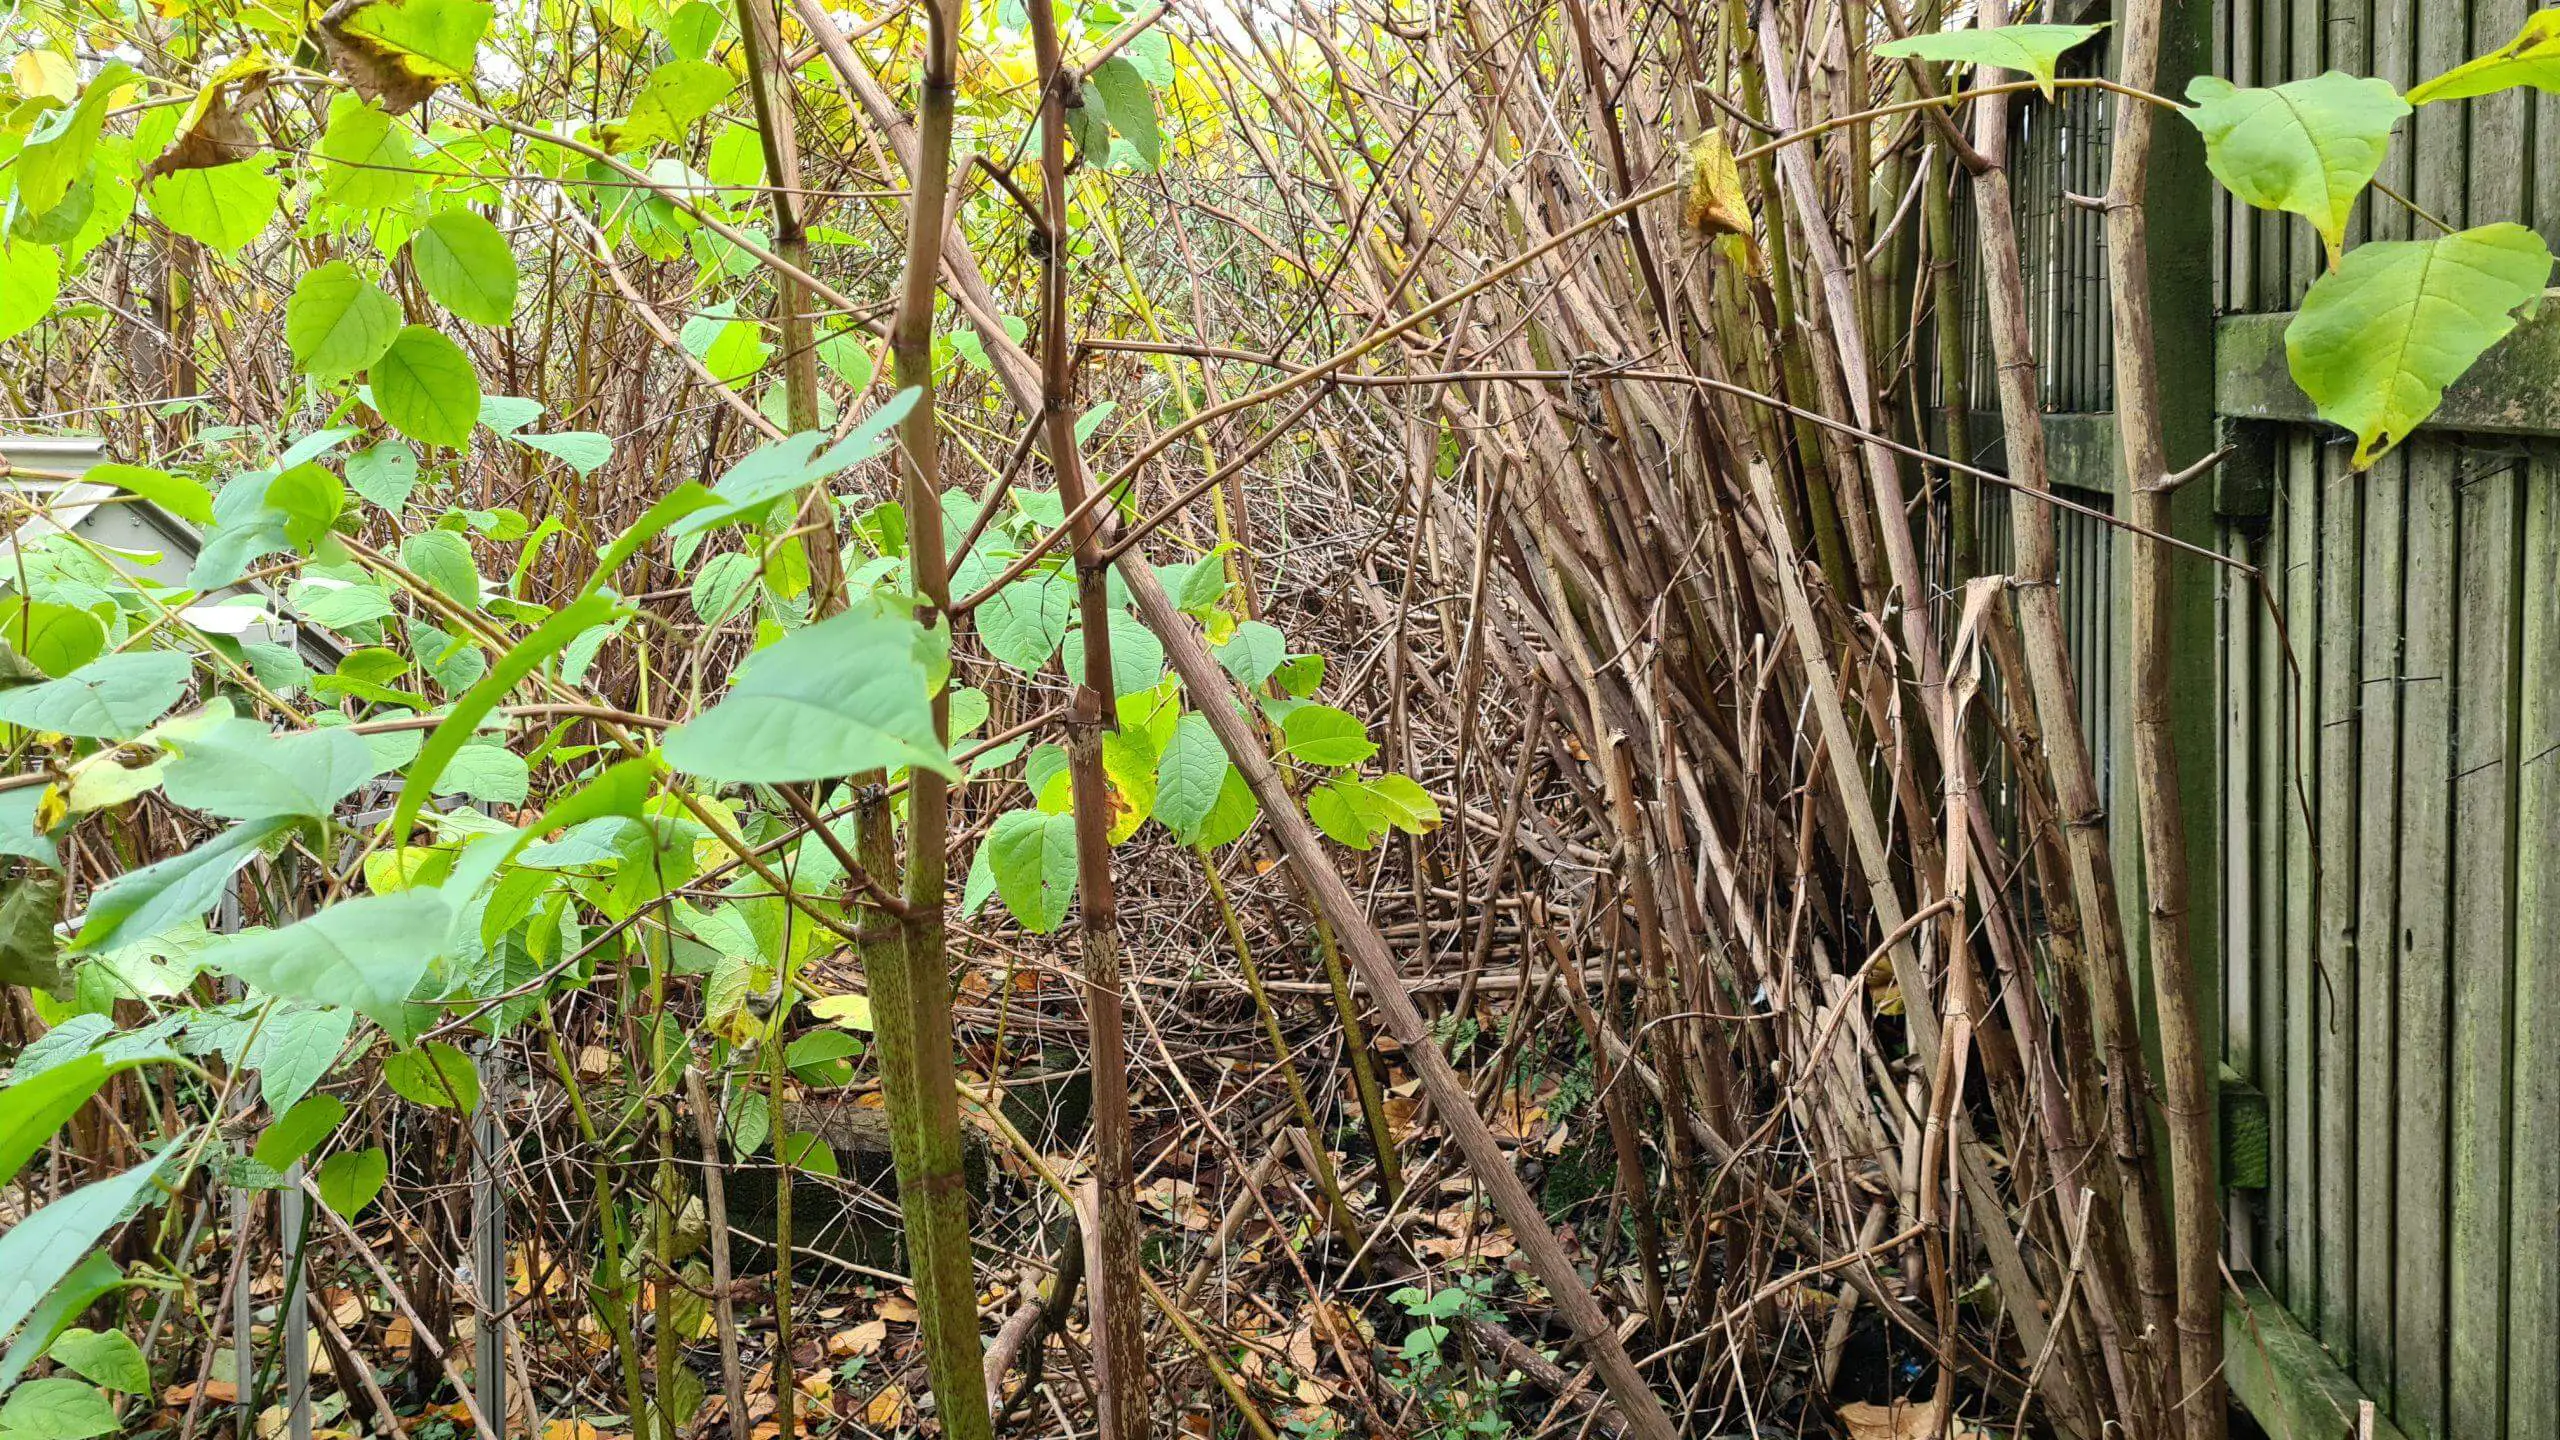 Japanese knotweed knows no boundaries as it pushes into new ground